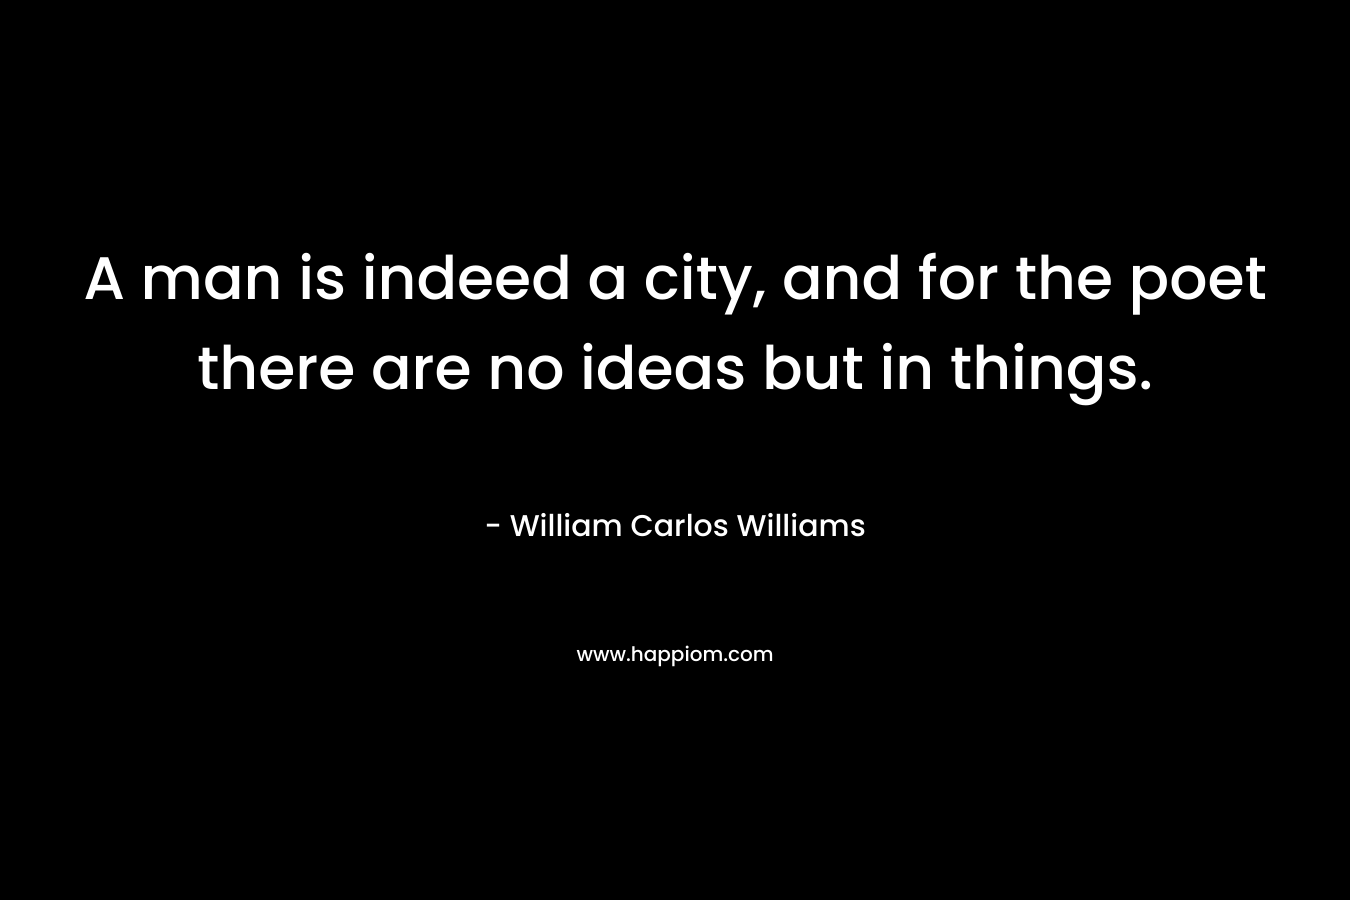 A man is indeed a city, and for the poet there are no ideas but in things.